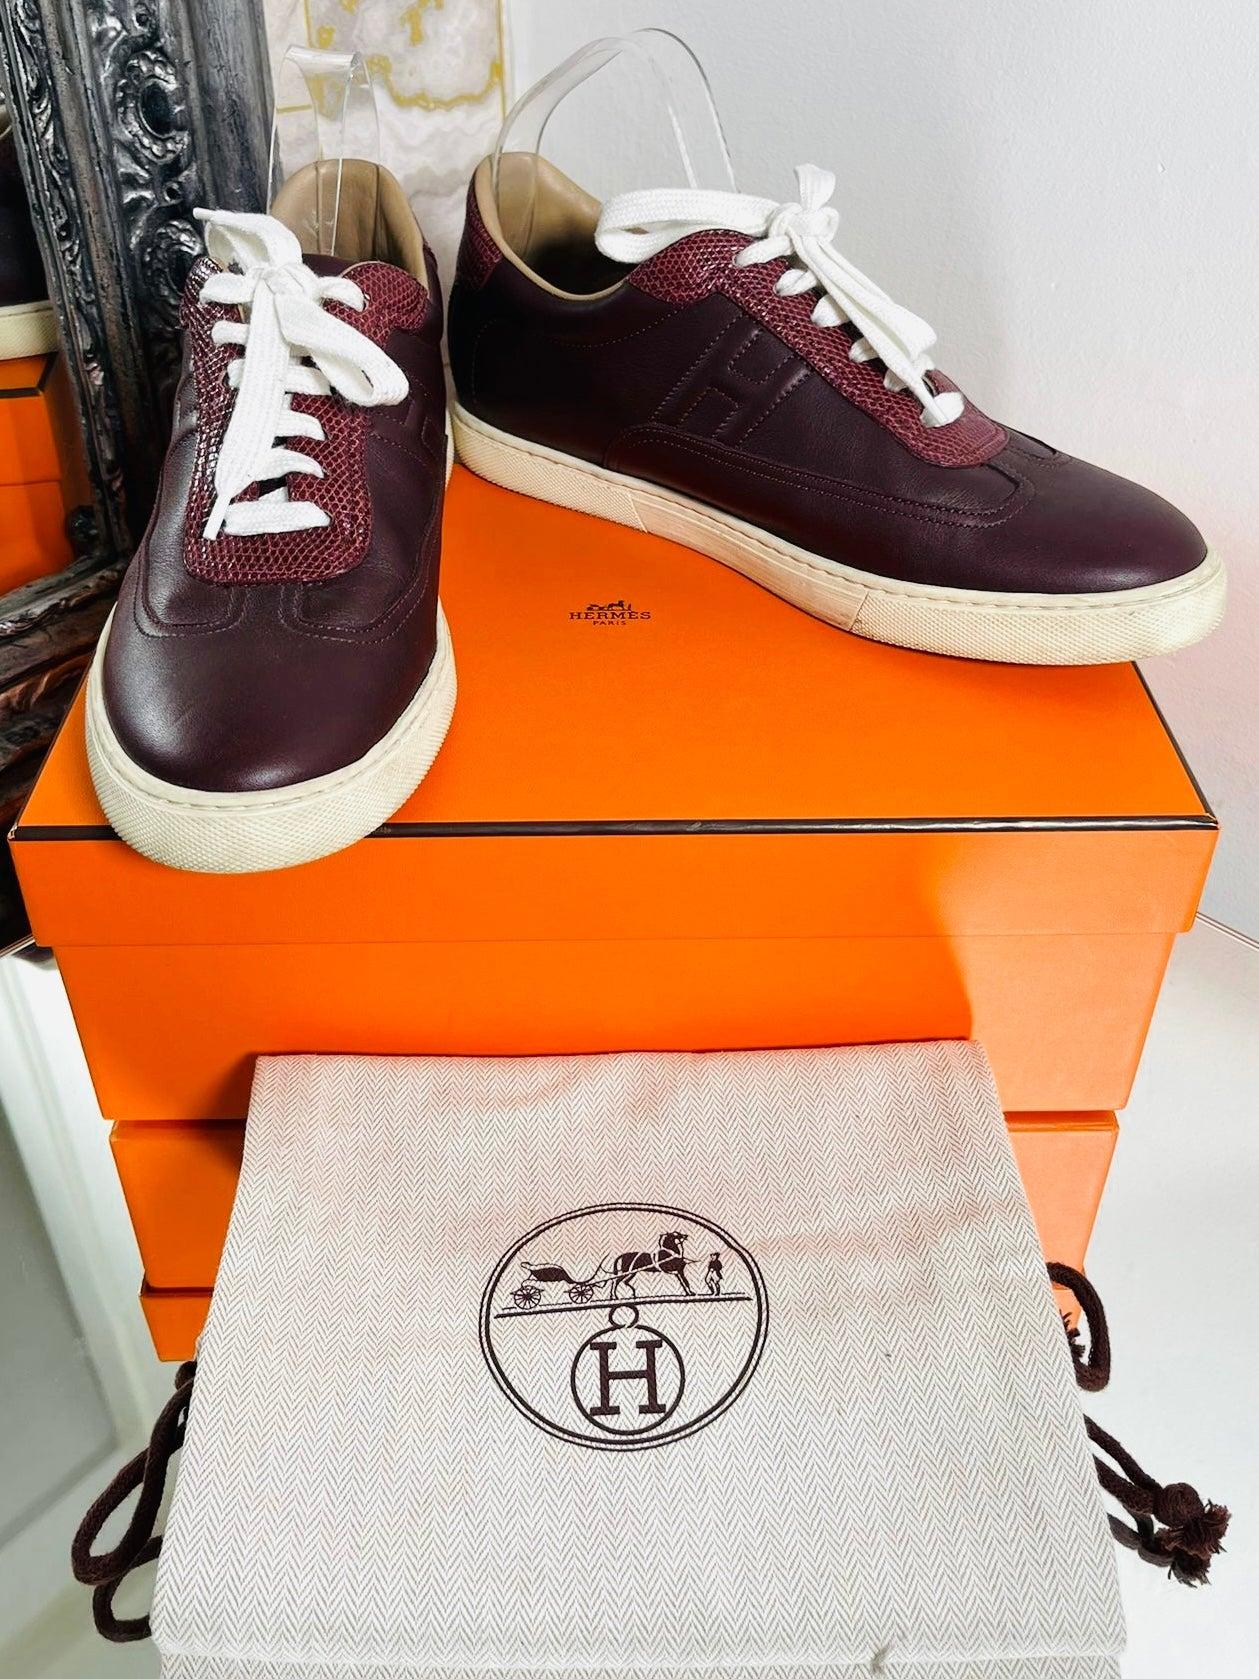 Hermes Leather & Lizard Skin 'H' Sneakers

Burgundy trainers with the 'H' to all sides inner and outer. Leather with Lizard skin accents to the fronts and heels.

Additional information:
Size – 40
Composition- Leather, Lizard Skin 
Condition – Very